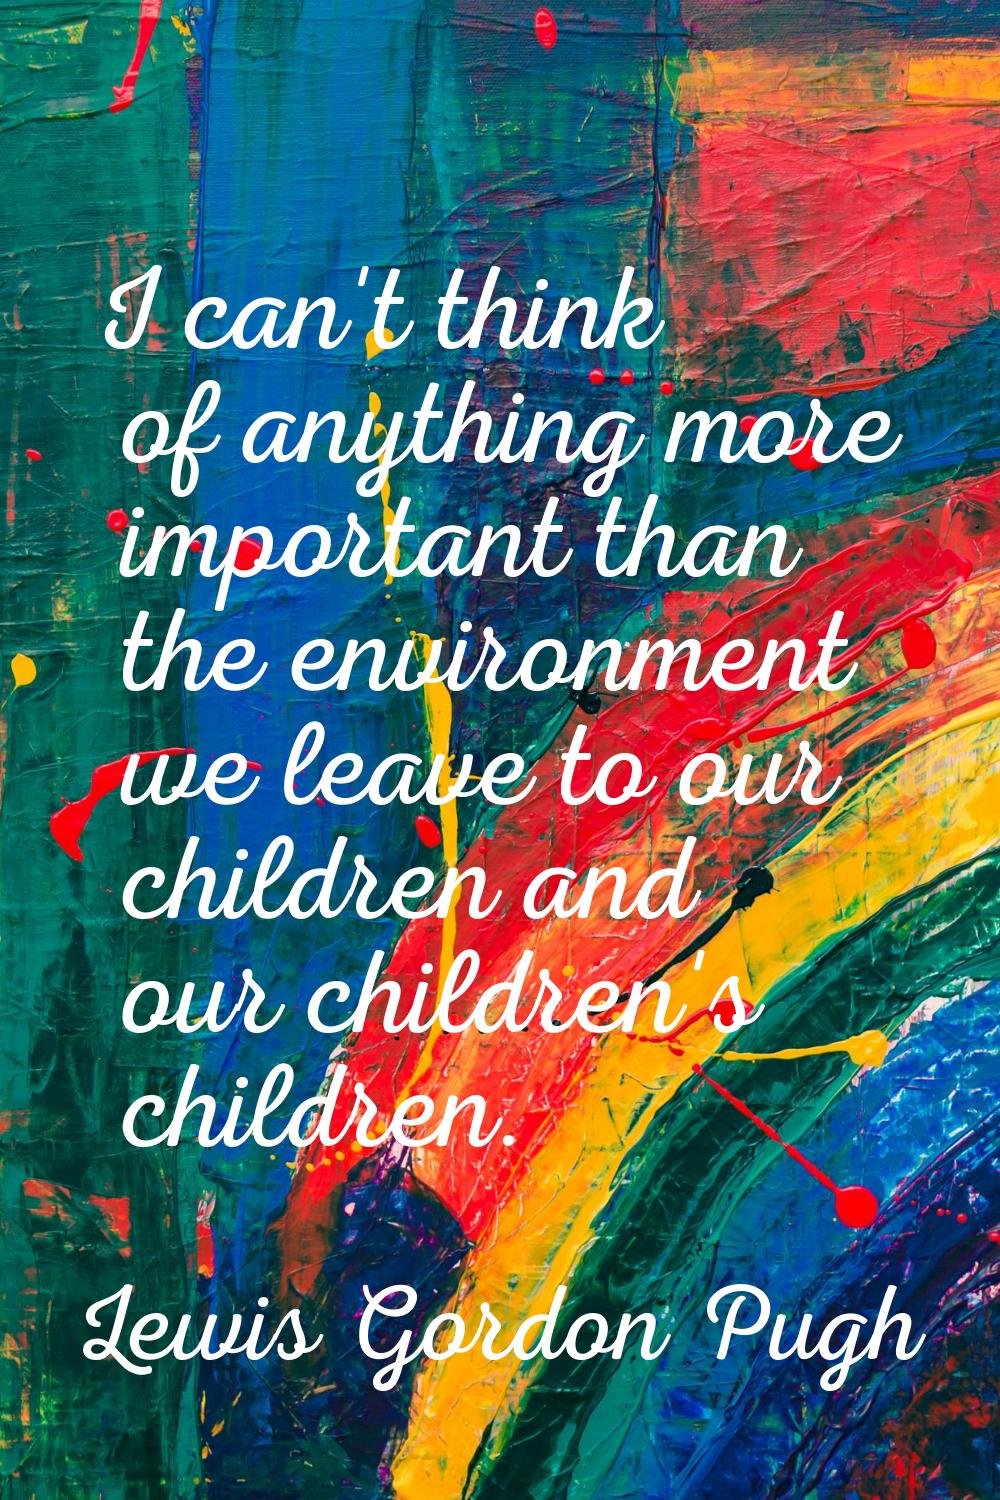 I can't think of anything more important than the environment we leave to our children and our chil